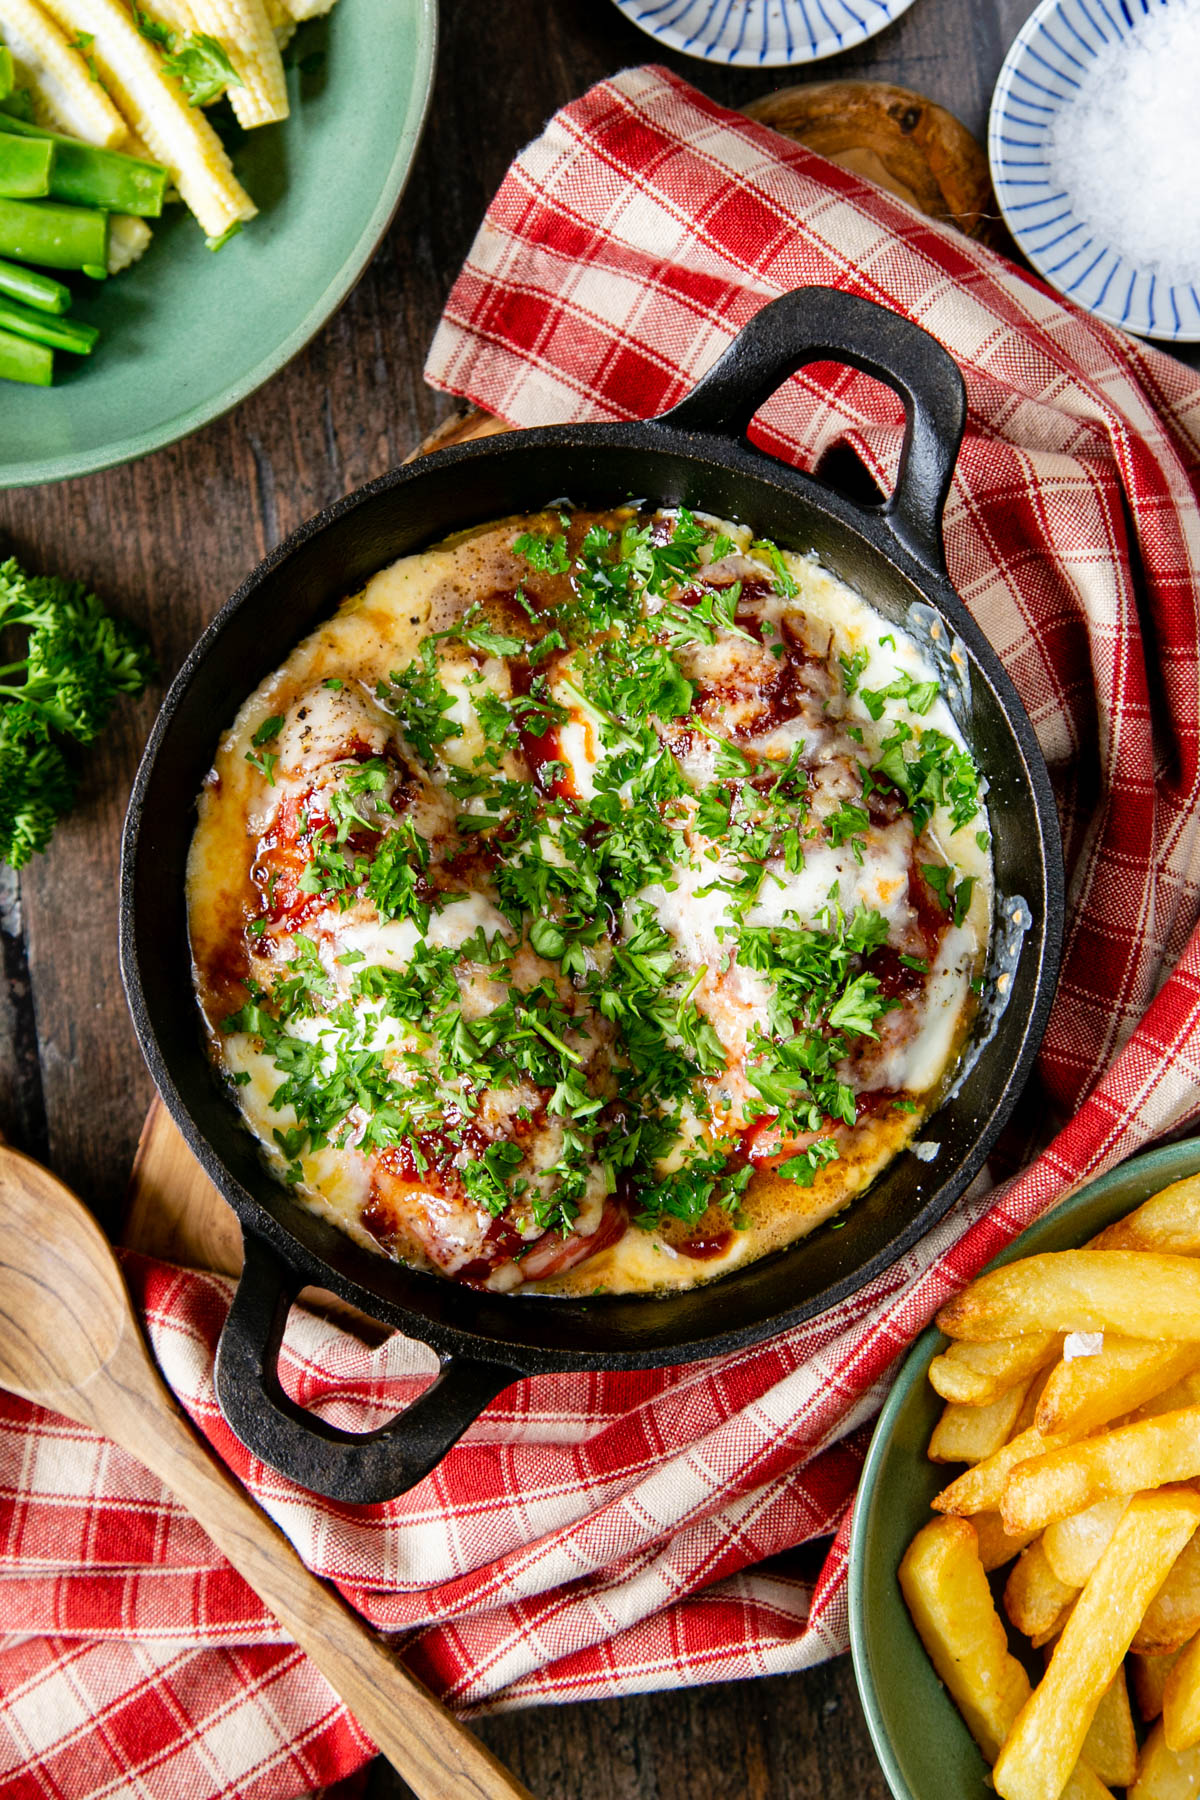 A cast iron dish of hunters' chicken. 2 breasts nestled nest to each other, with plenty of sauce, all garnished with vibrant green chopped parsley.